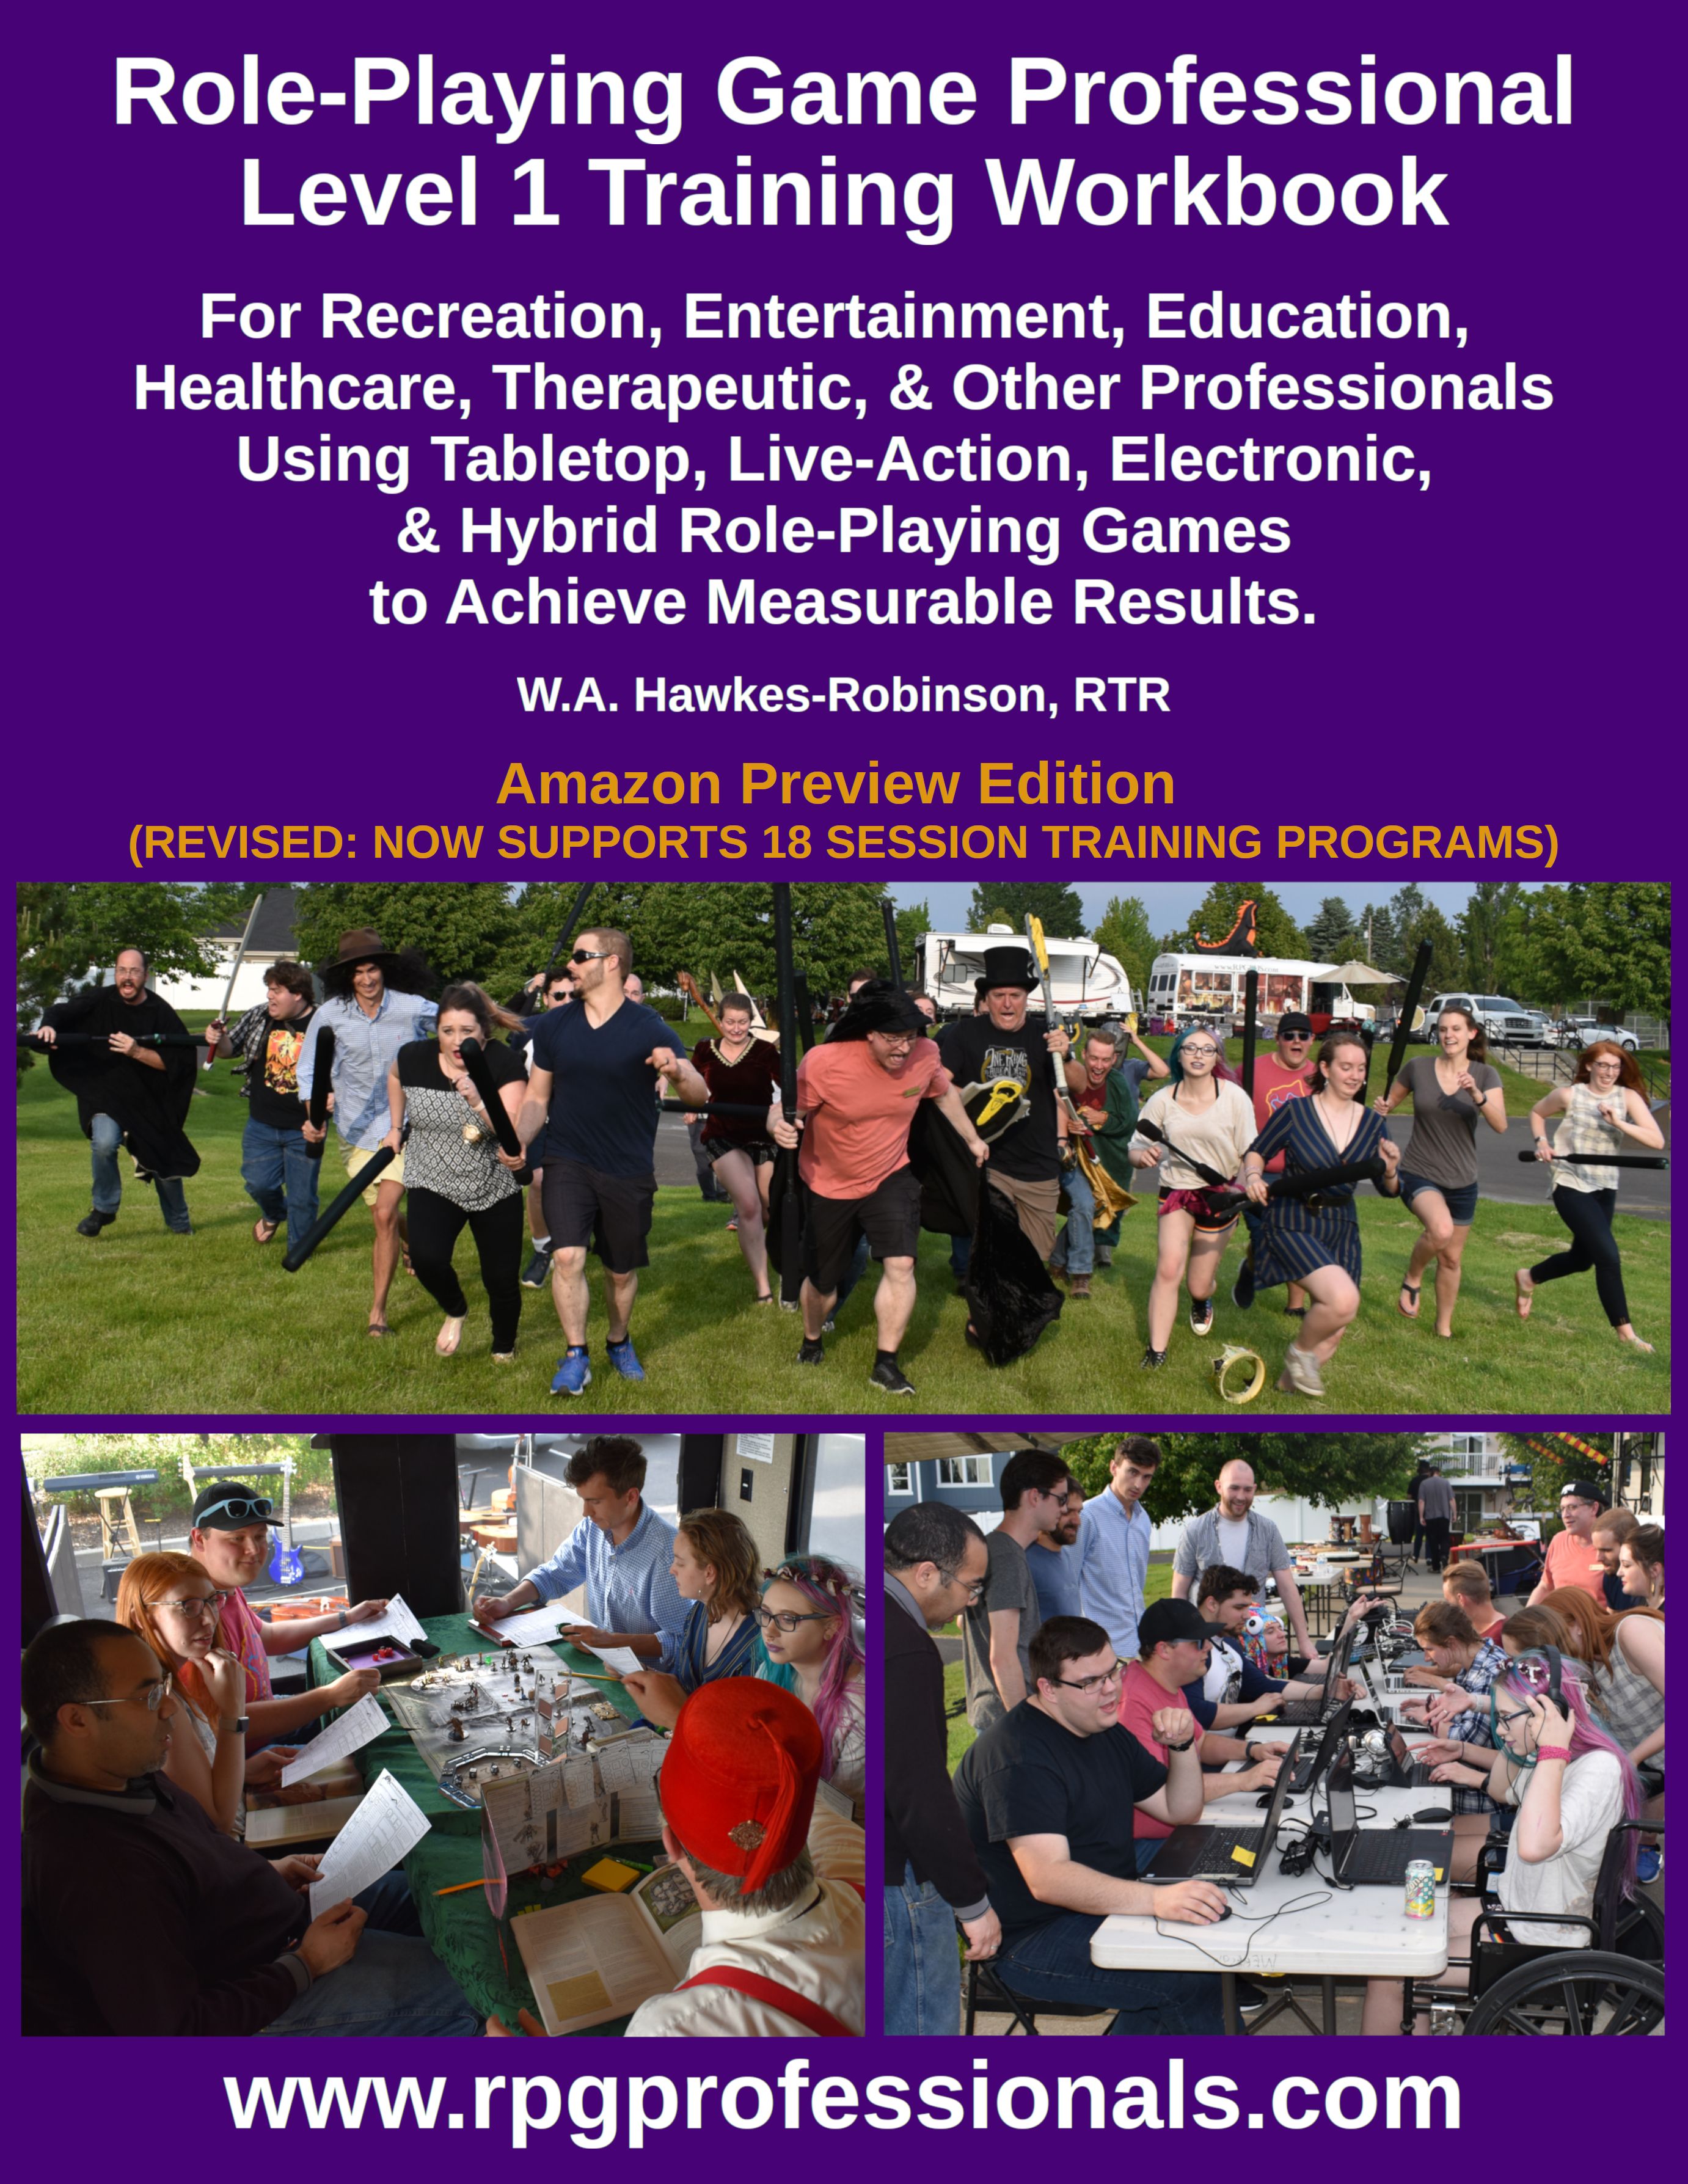 The Role-Playing Game Professional Training Workbook (Level 1) now available through Amazon